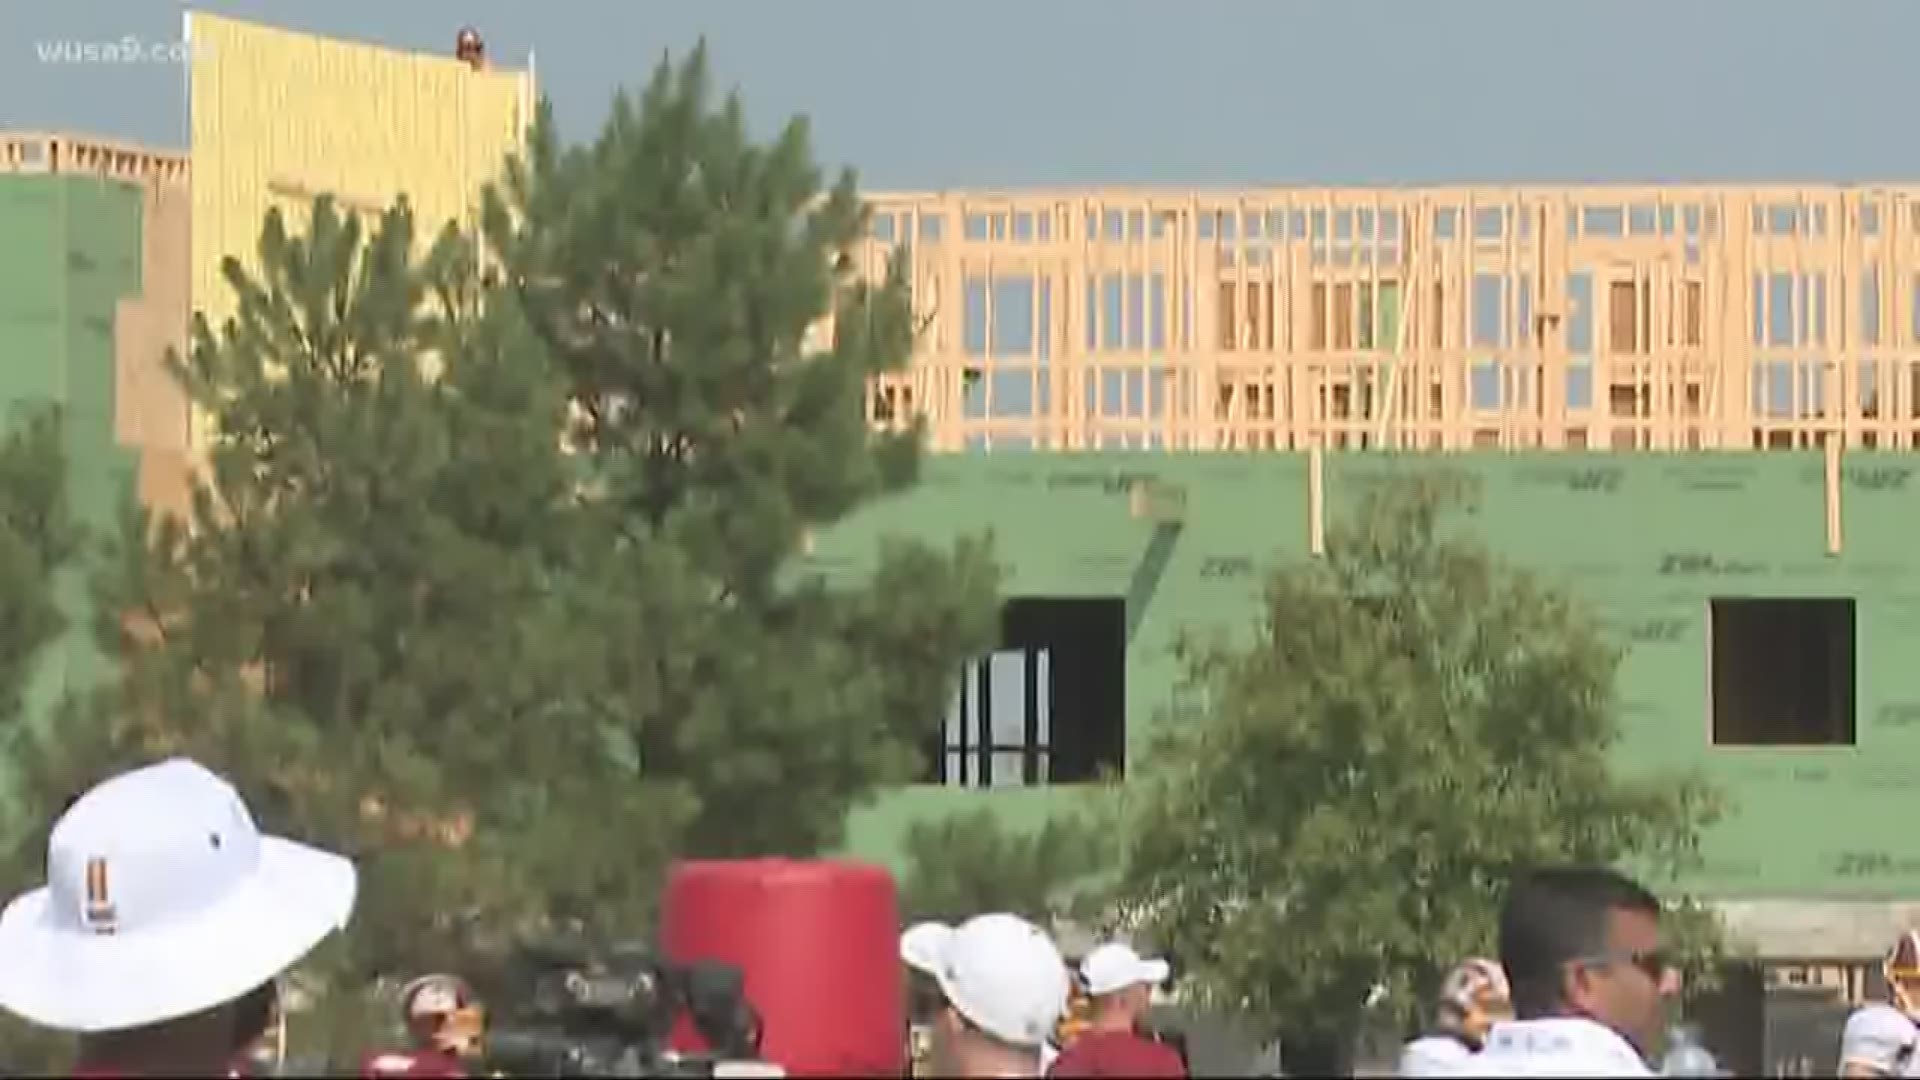 A construction site near the Redskins training facility had a Dallas Cowboys flag flying briefly.